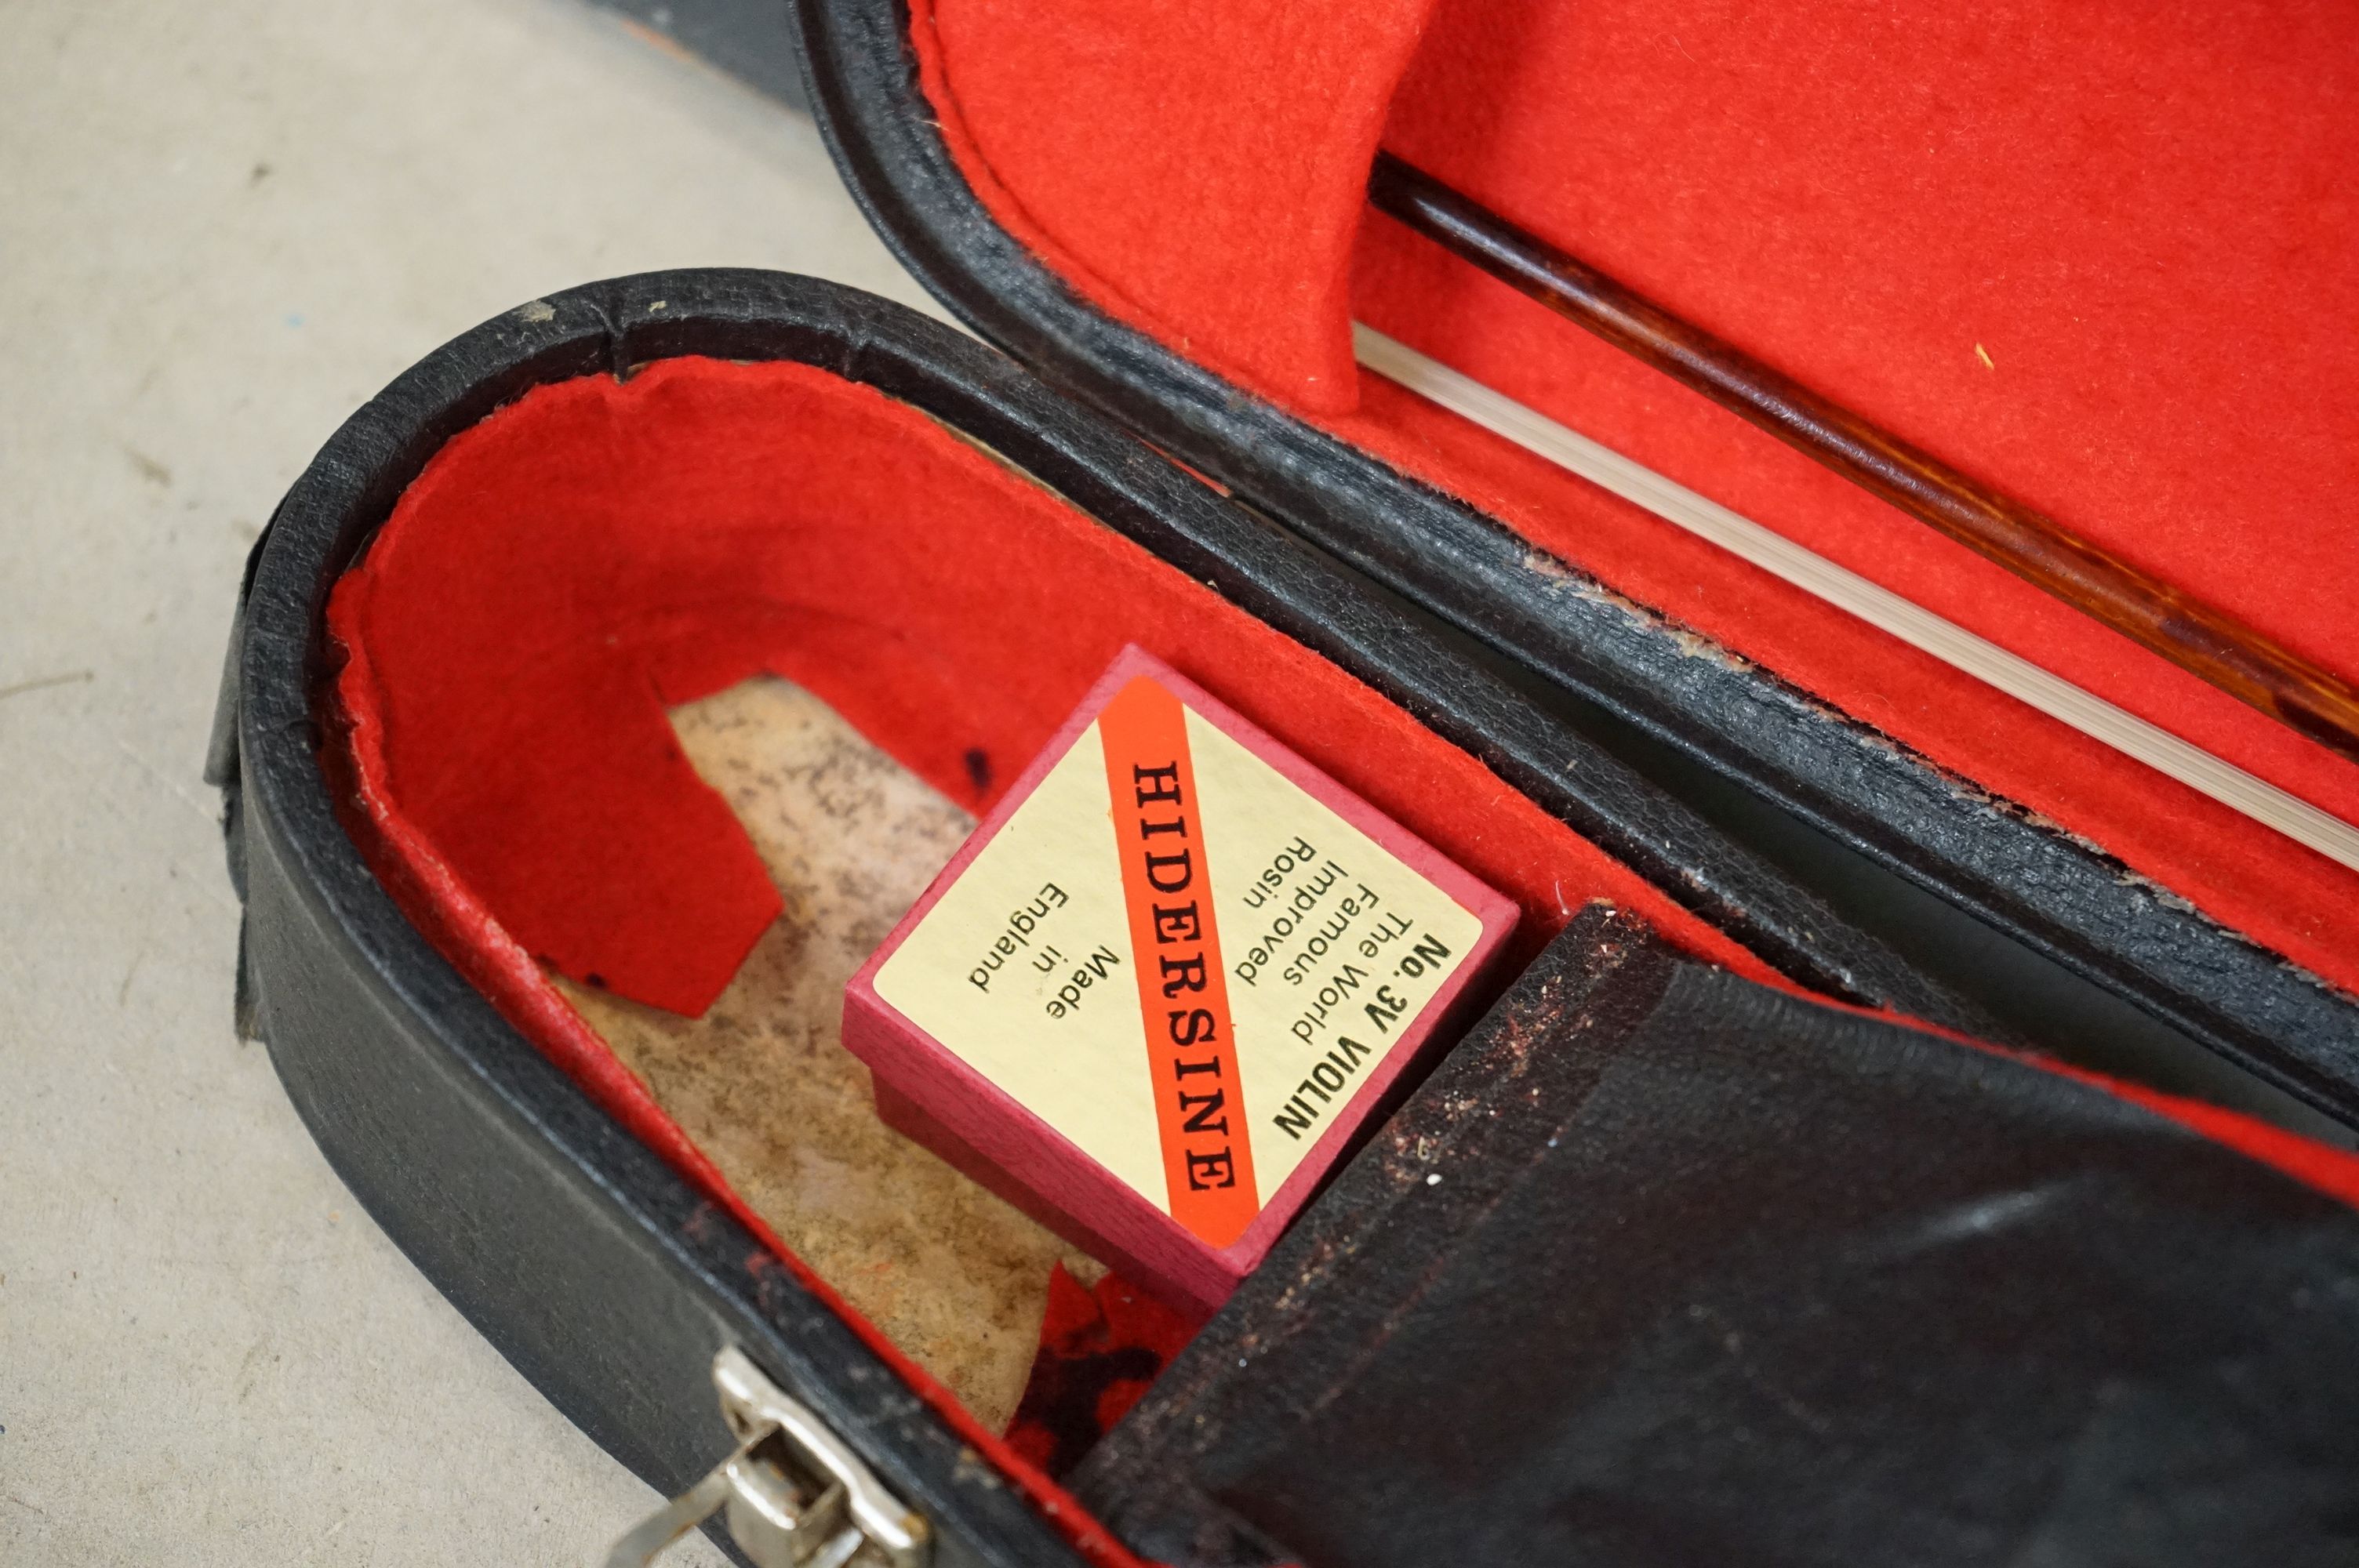 A violin and bow together with hardcase, import label for Boosey & Hawkes to inside of violin. - Image 9 of 10